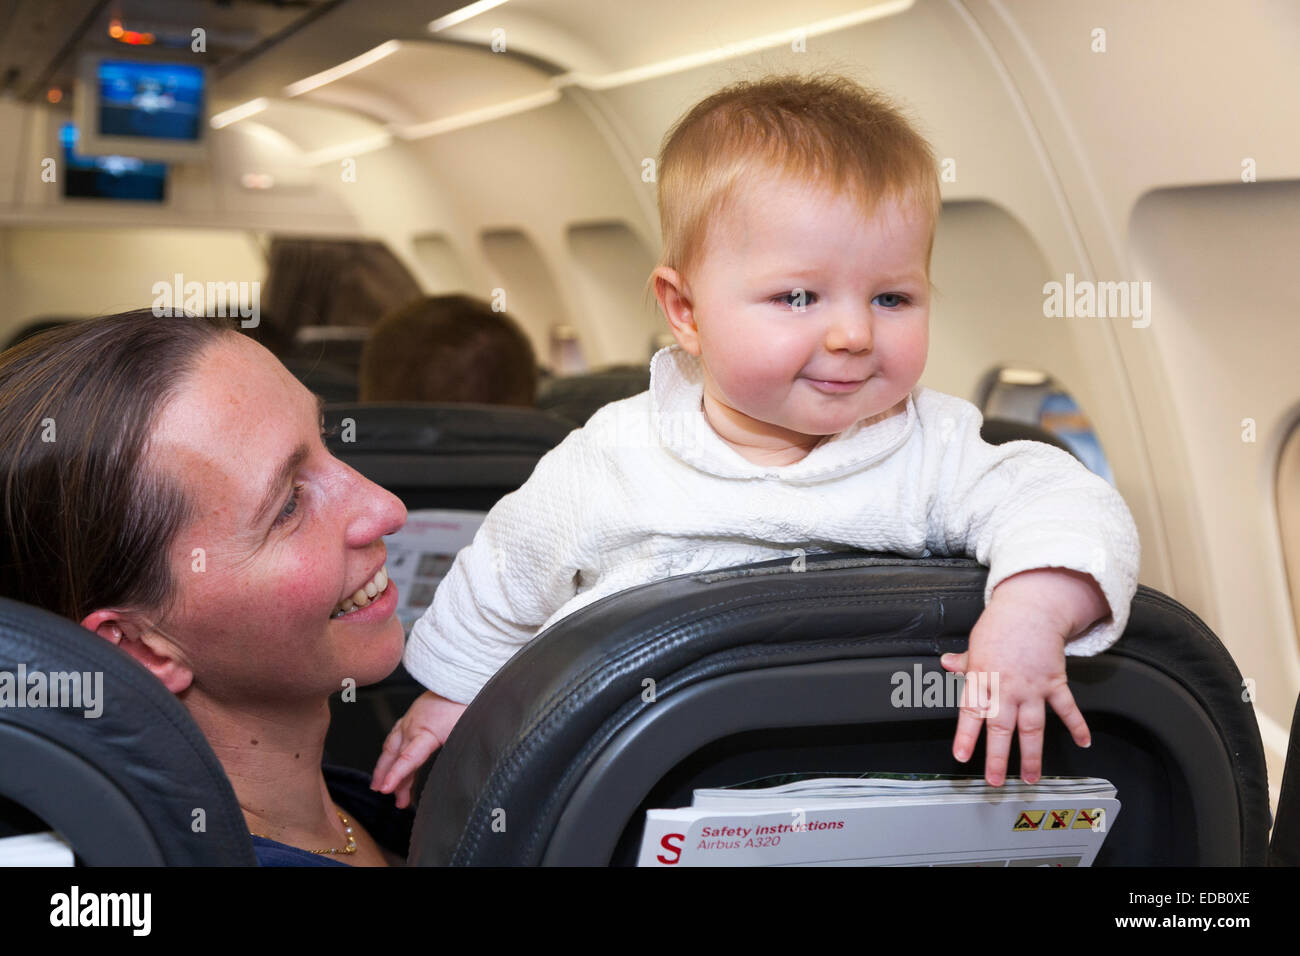 Passenger / mum / mother going on holiday / vacation with her baby travelling on an air plane / airplane / aeroplane / flight. Stock Photo